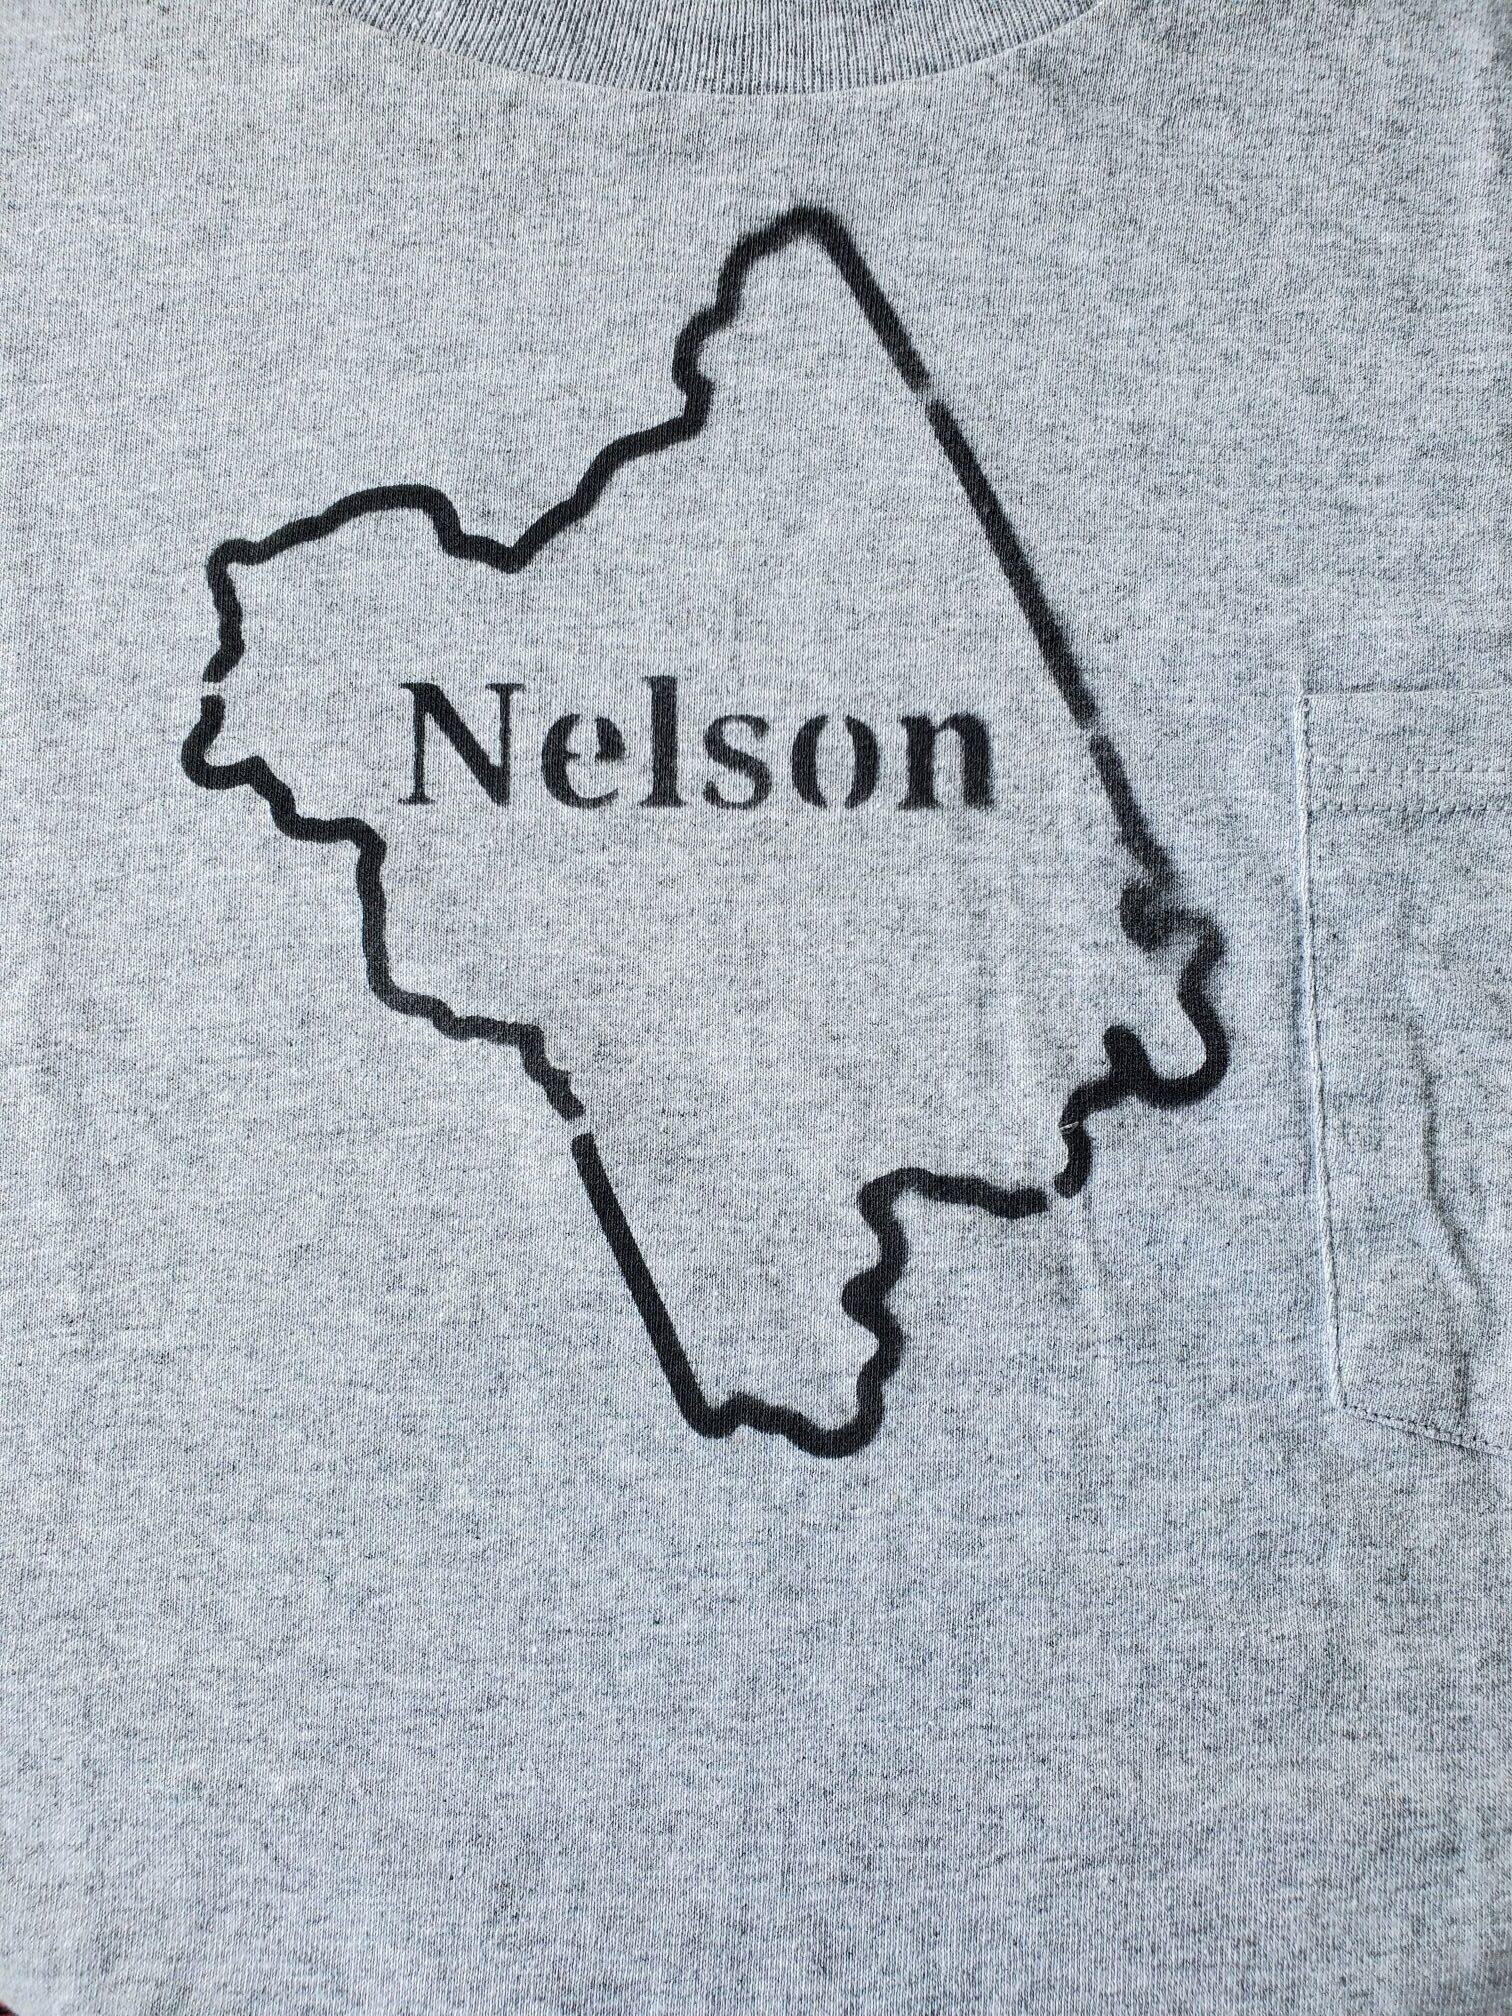 Nelson County T-Shirt